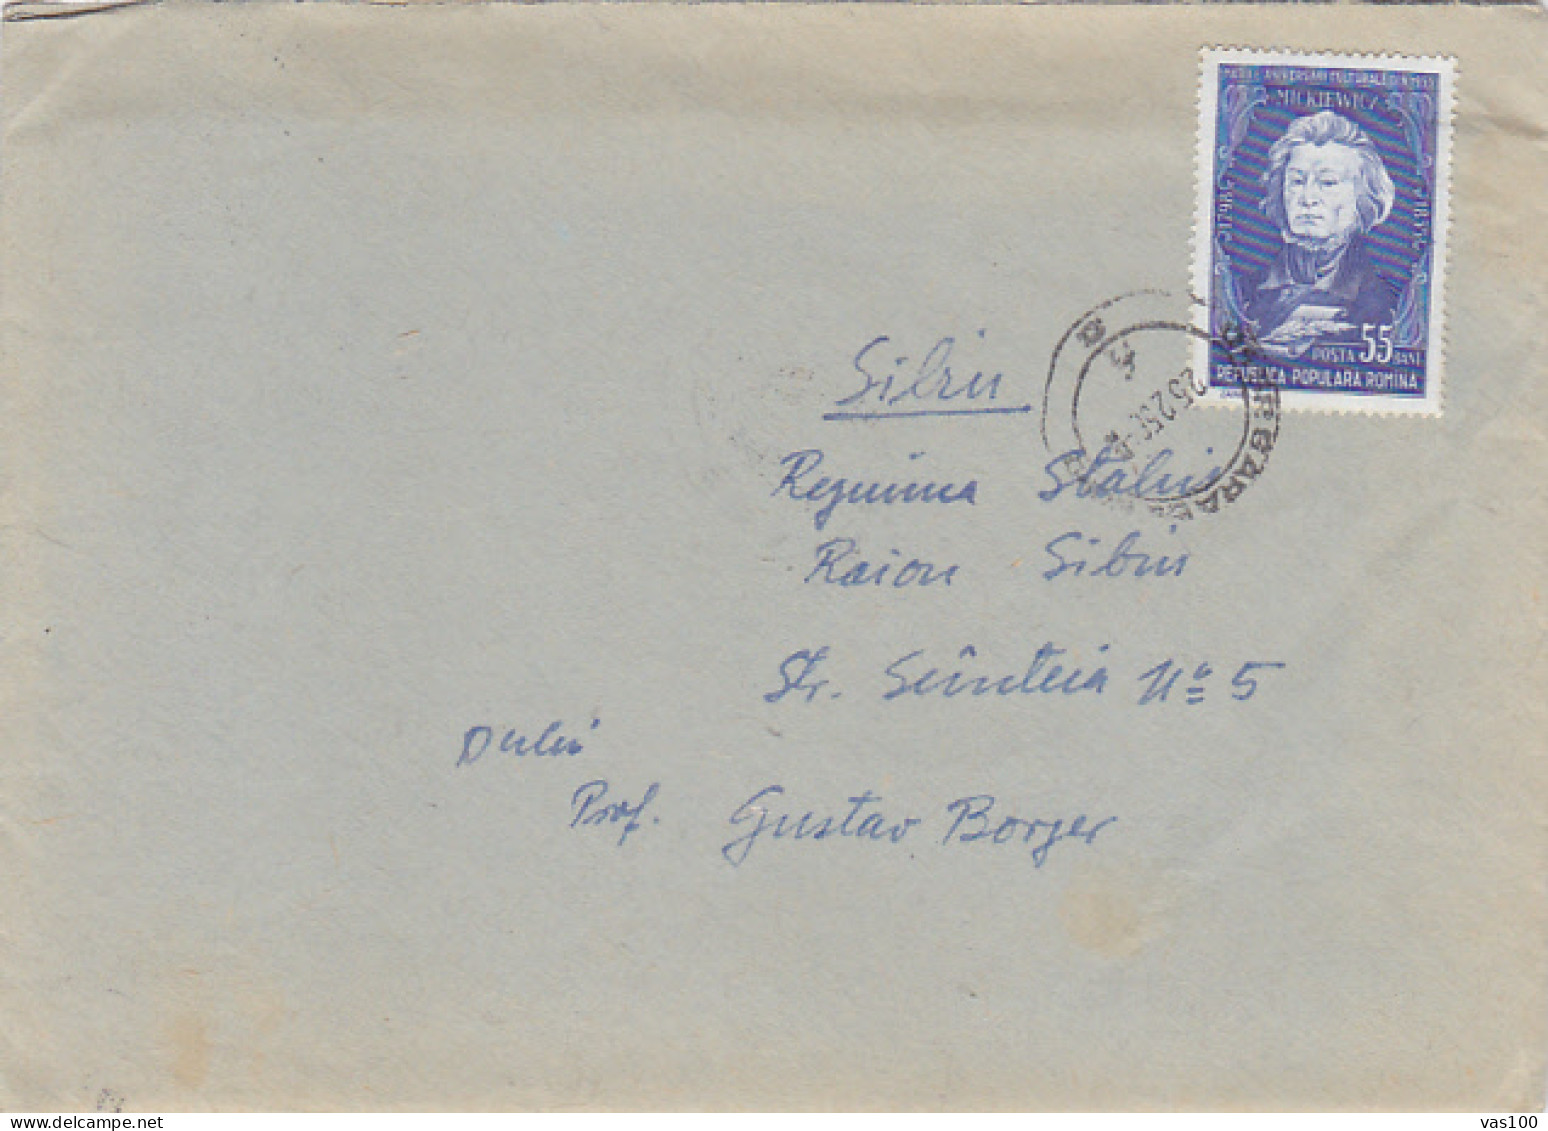 ADAM MICKIEWICZ- WRITER, STAMP ON COVER, 1956, ROMANIA - Covers & Documents